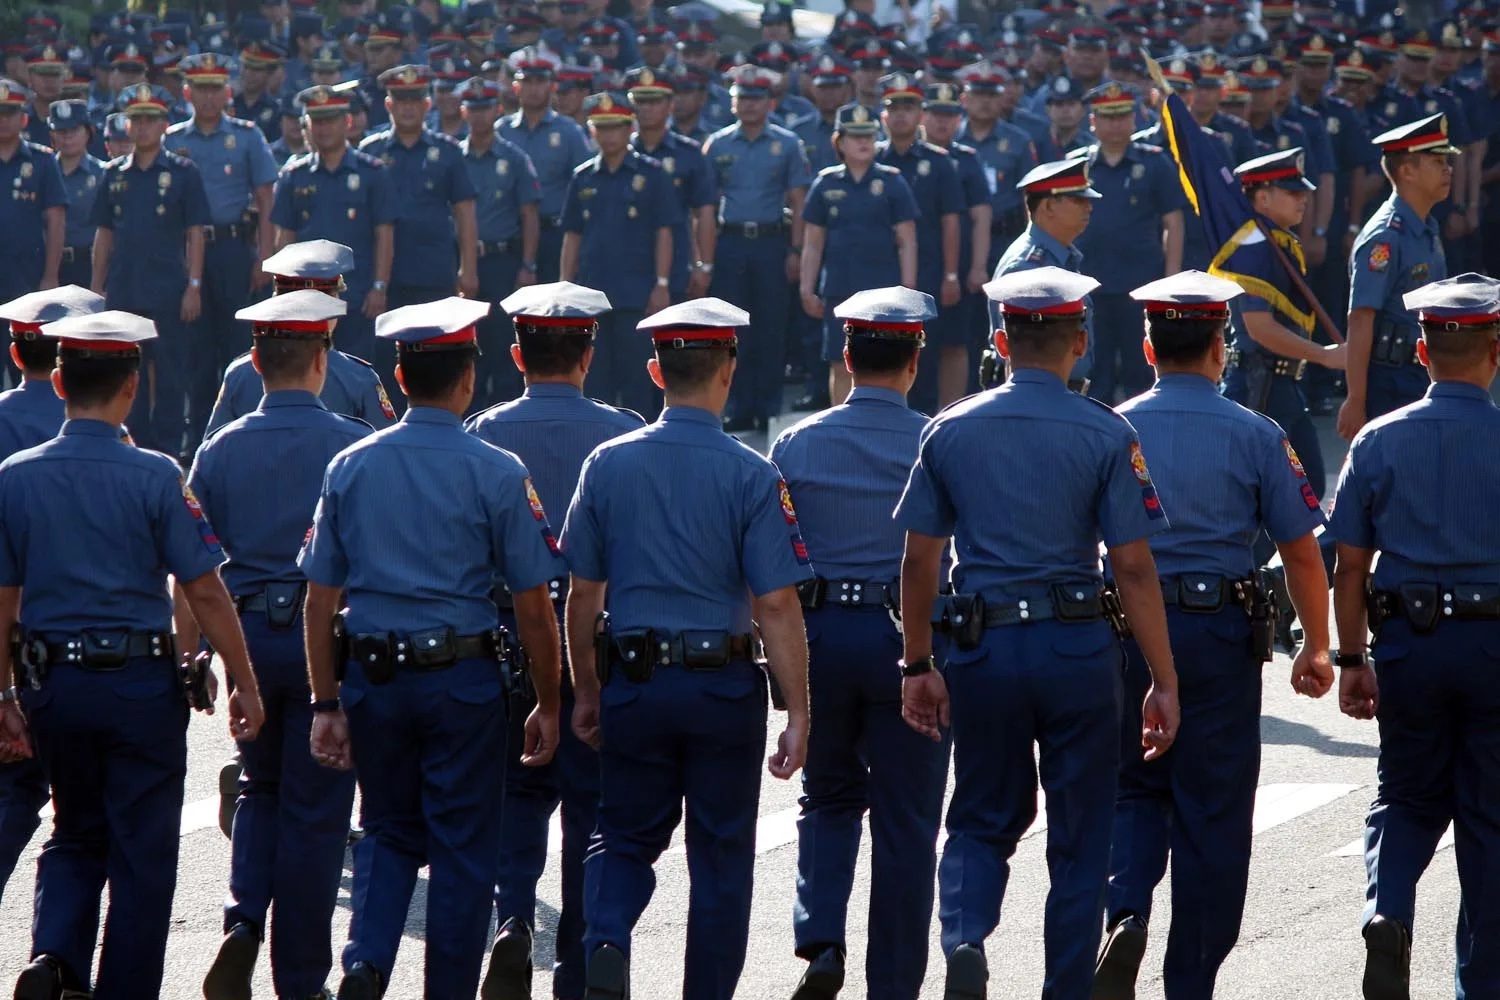 Cleansing or political vendetta? 40 Davao City police officers ordered relieved